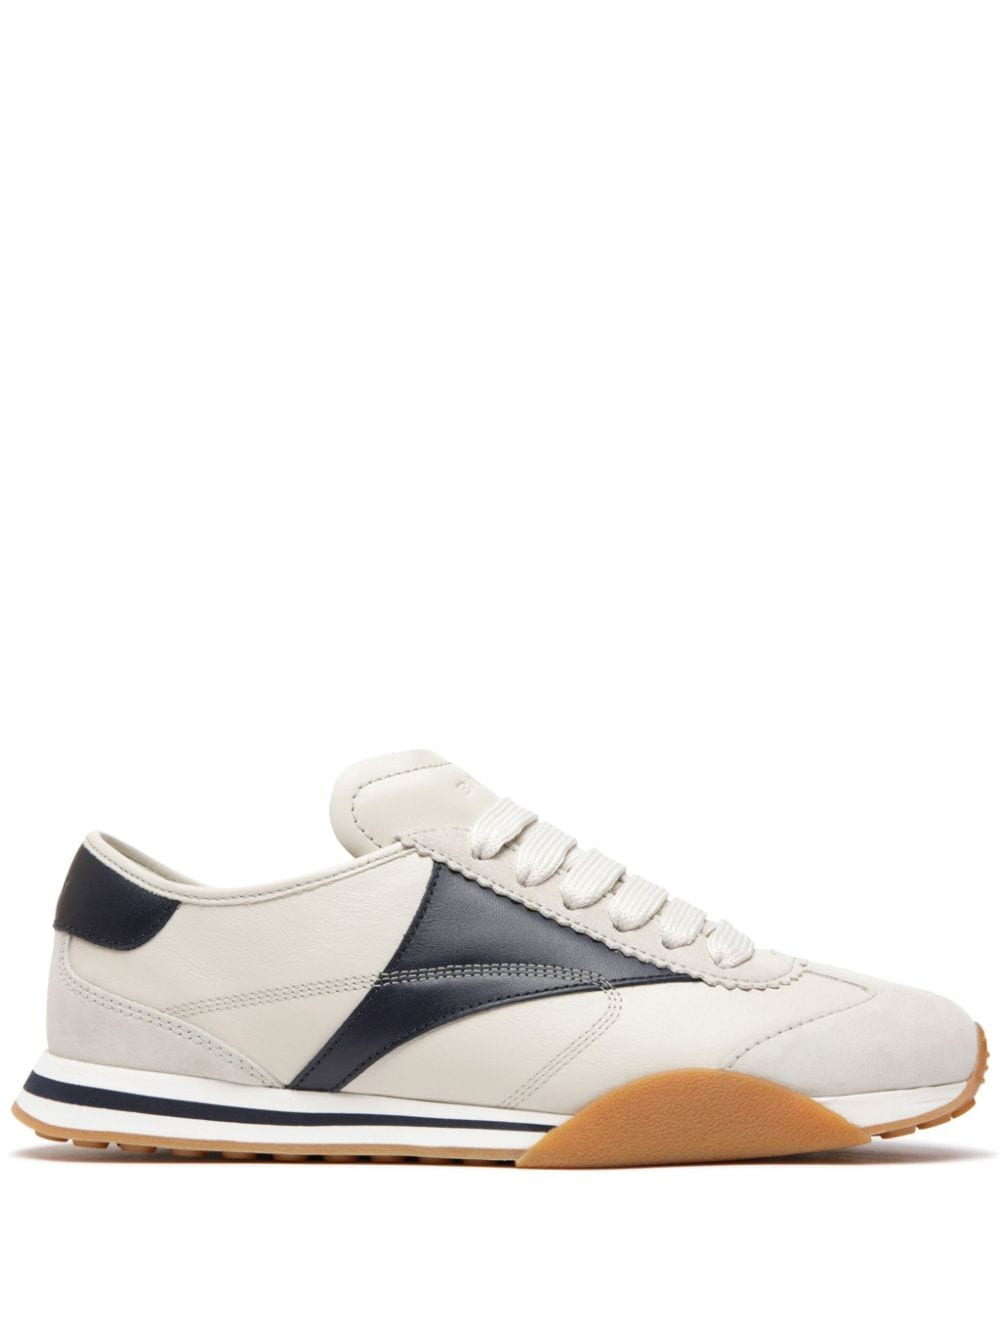 Bally Sonney lace-up leather sneakers - White